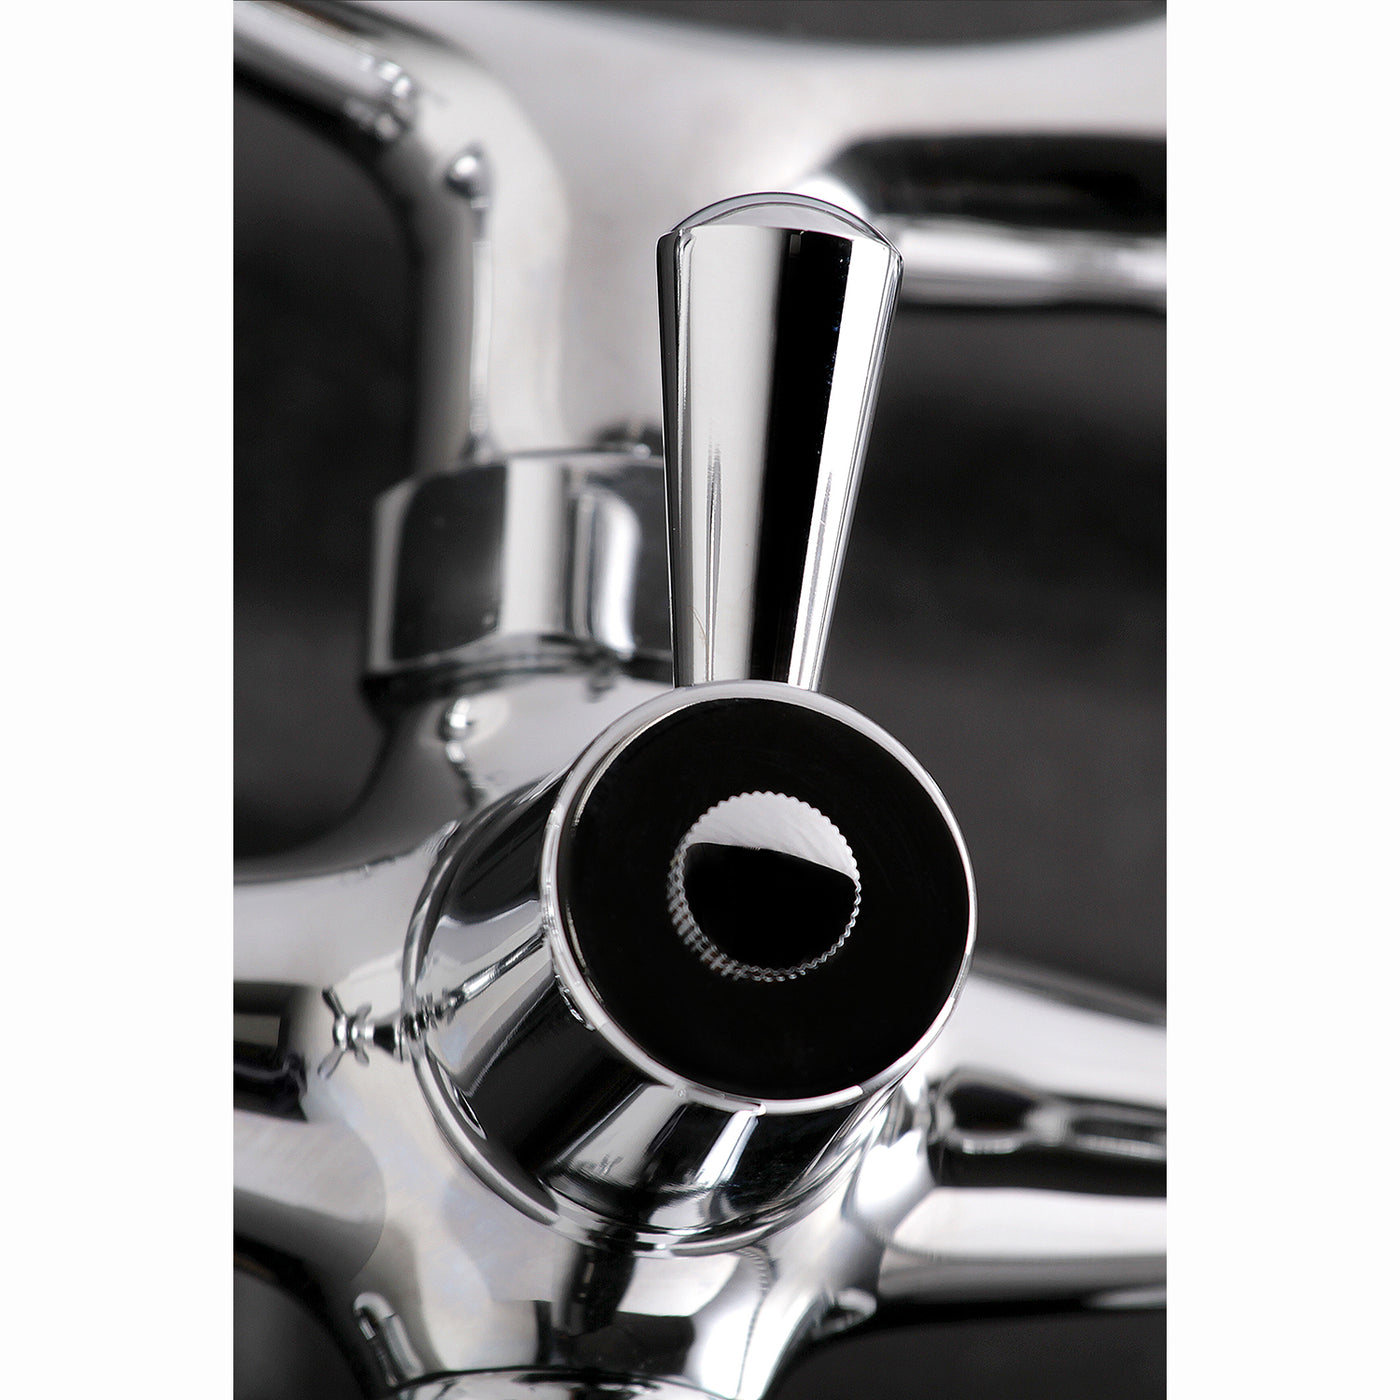 Elements of Design ES2661X 6-Inch Adjustable Wall Mount Clawfoot Tub Faucet, Polished Chrome